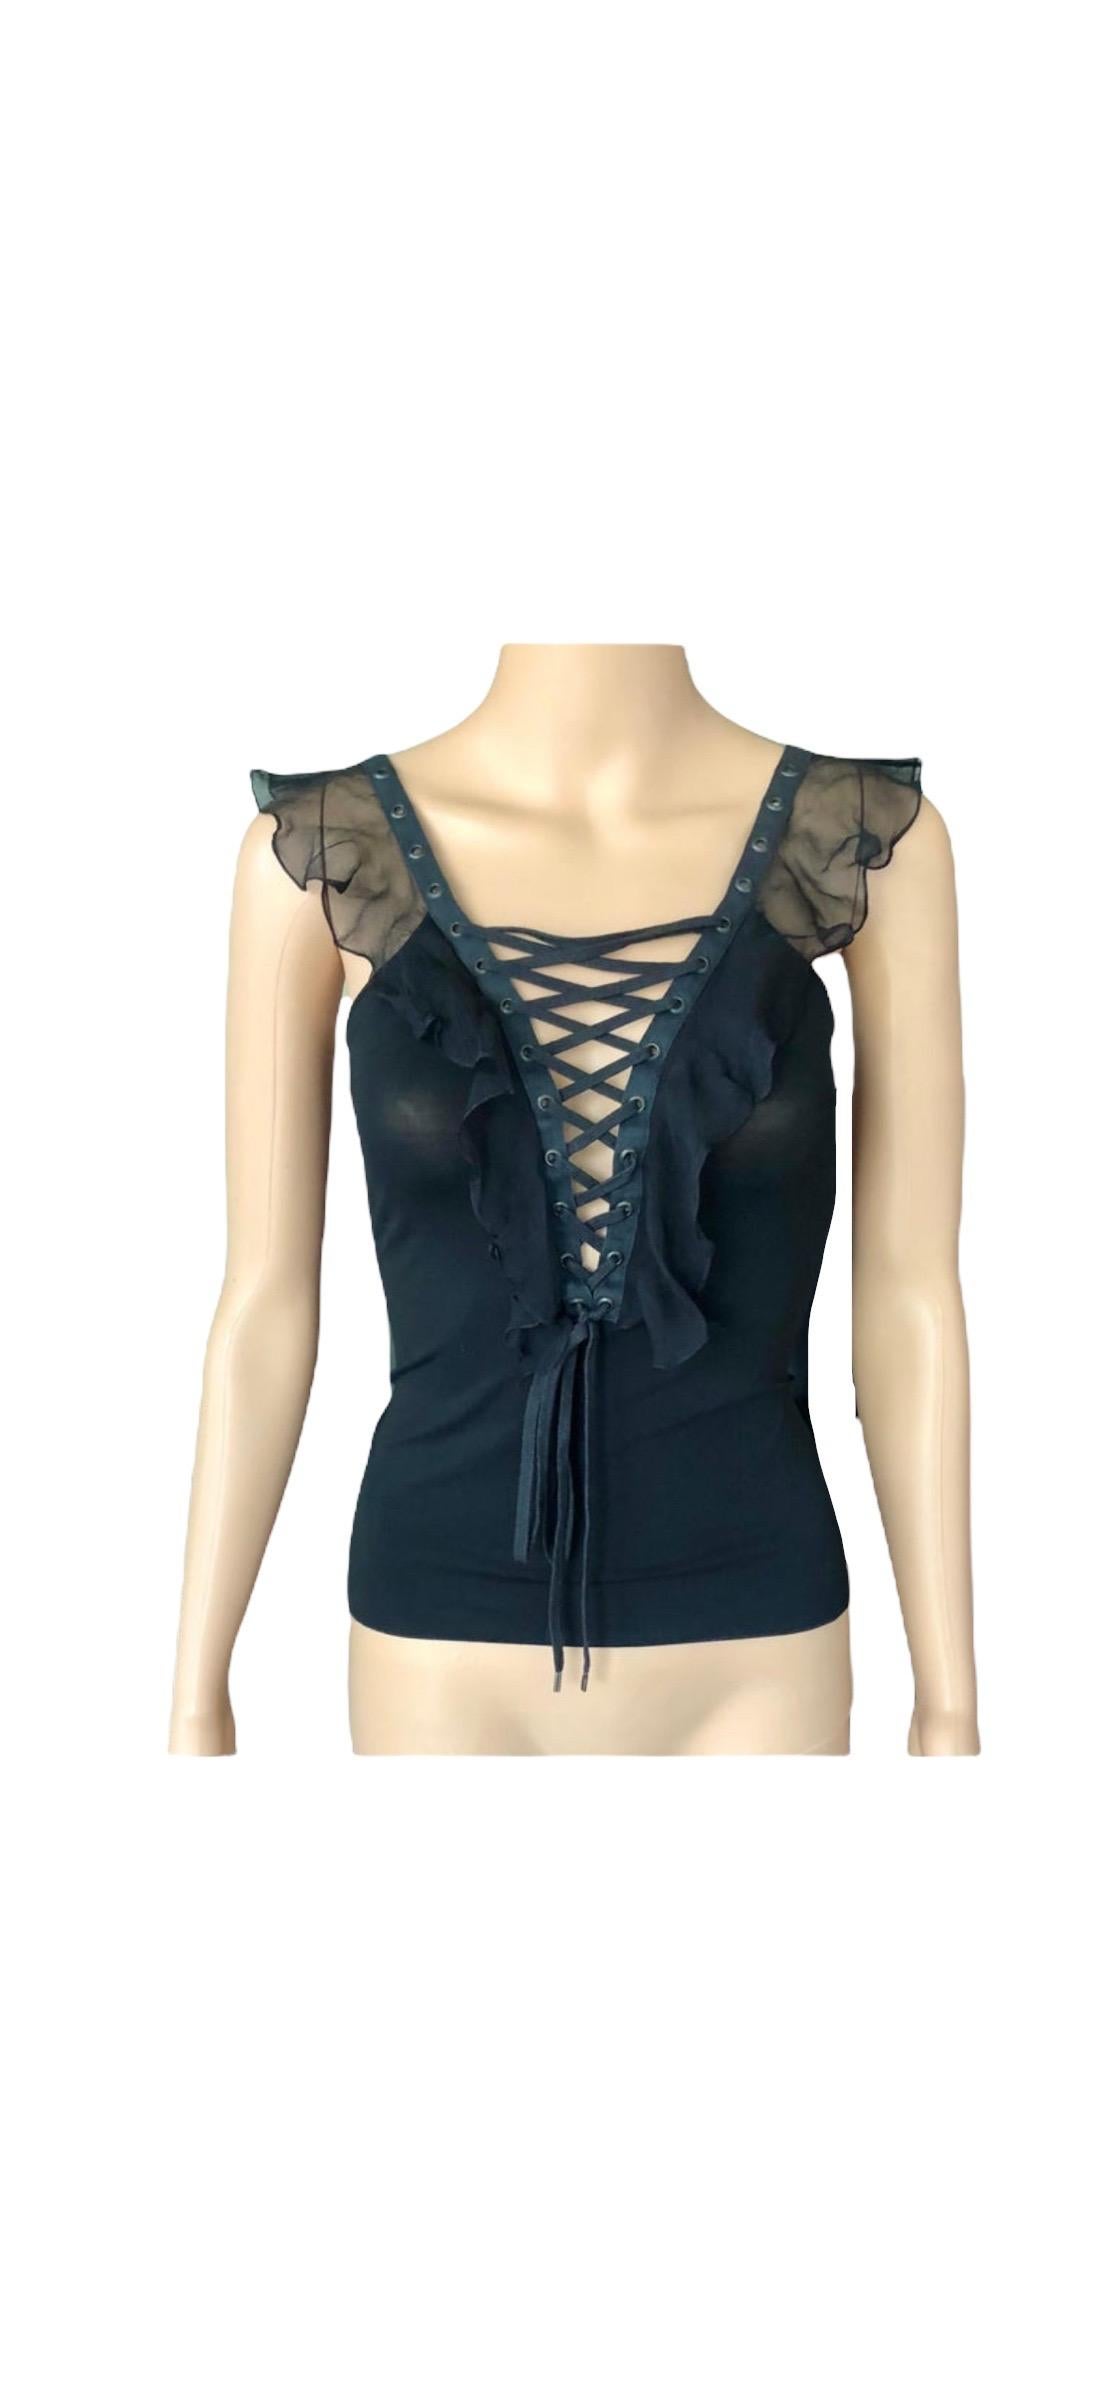 Christian Dior By John Galliano S/S 2003 Plunging Lace Up Tie Up Black Top For Sale 1